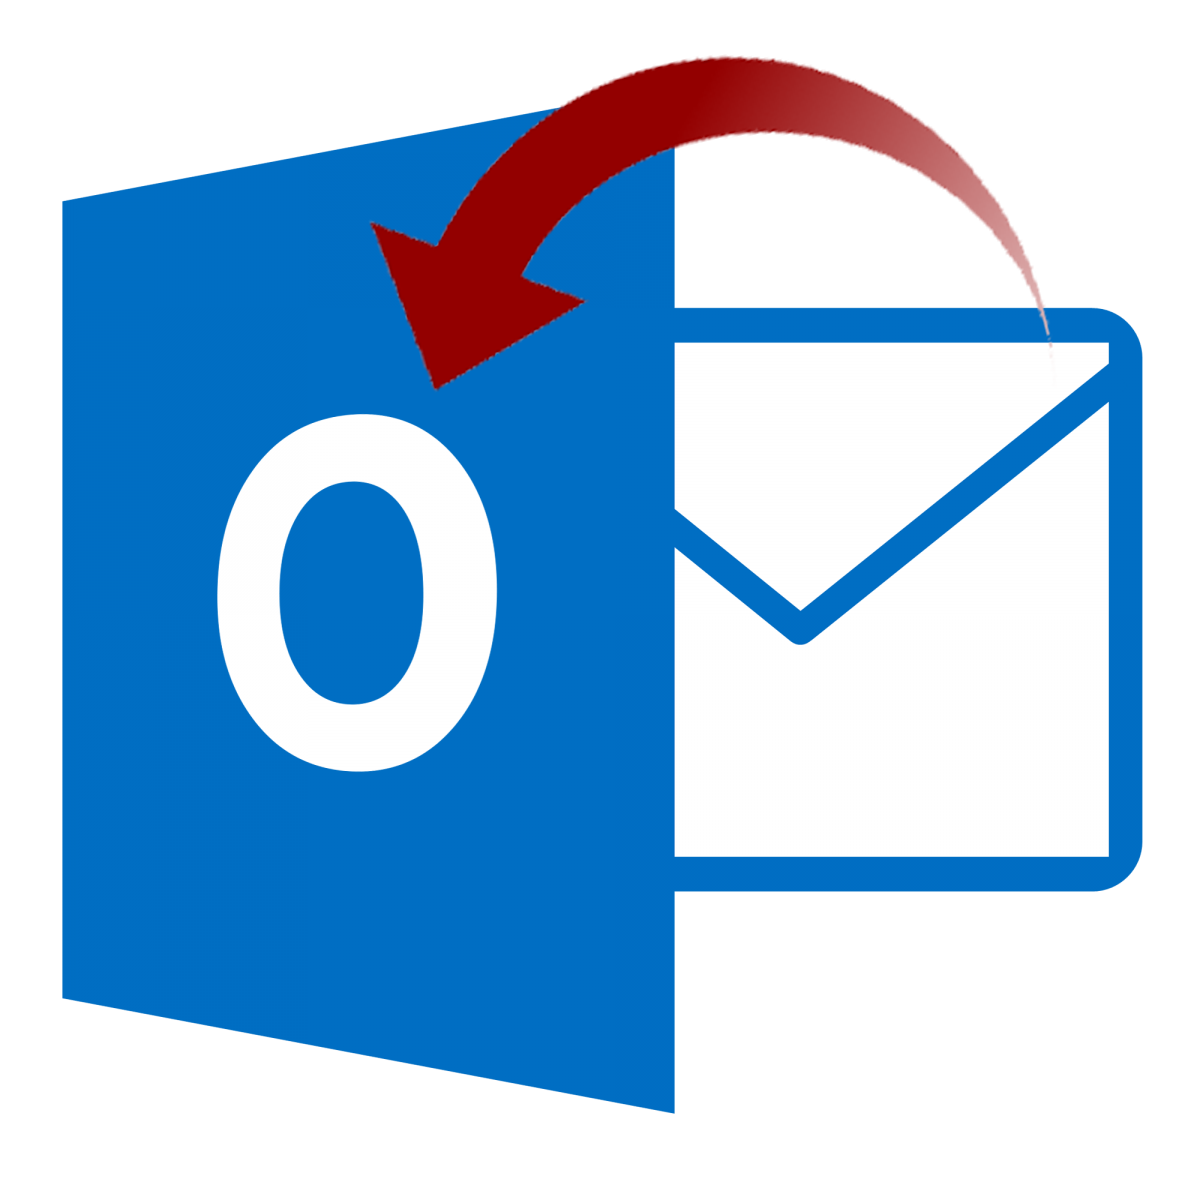 Office mail outlook. Значок Outlook. Microsoft Outlook. Outlook логотип. Microsoft Outlook логотип.